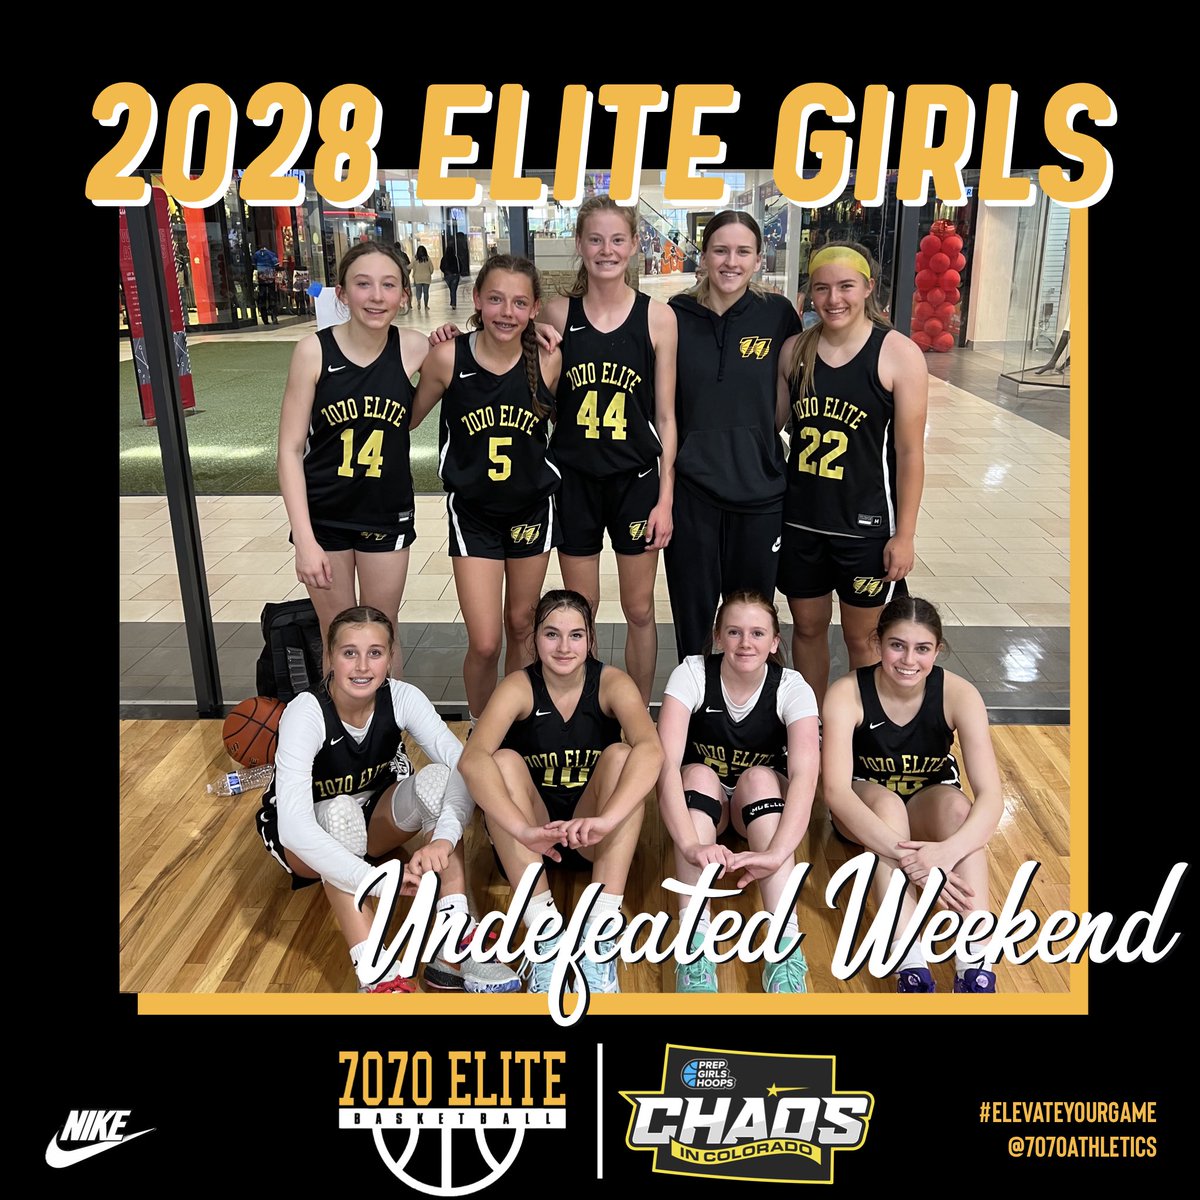 2028 Elite Girls Completes an Undefeated Weekend at the @PrepGirlsHoops #PGHChaosInColorado in Denver, CO!! 

#ElevateYourGame | #WeComin | #LoyalToTheSprings